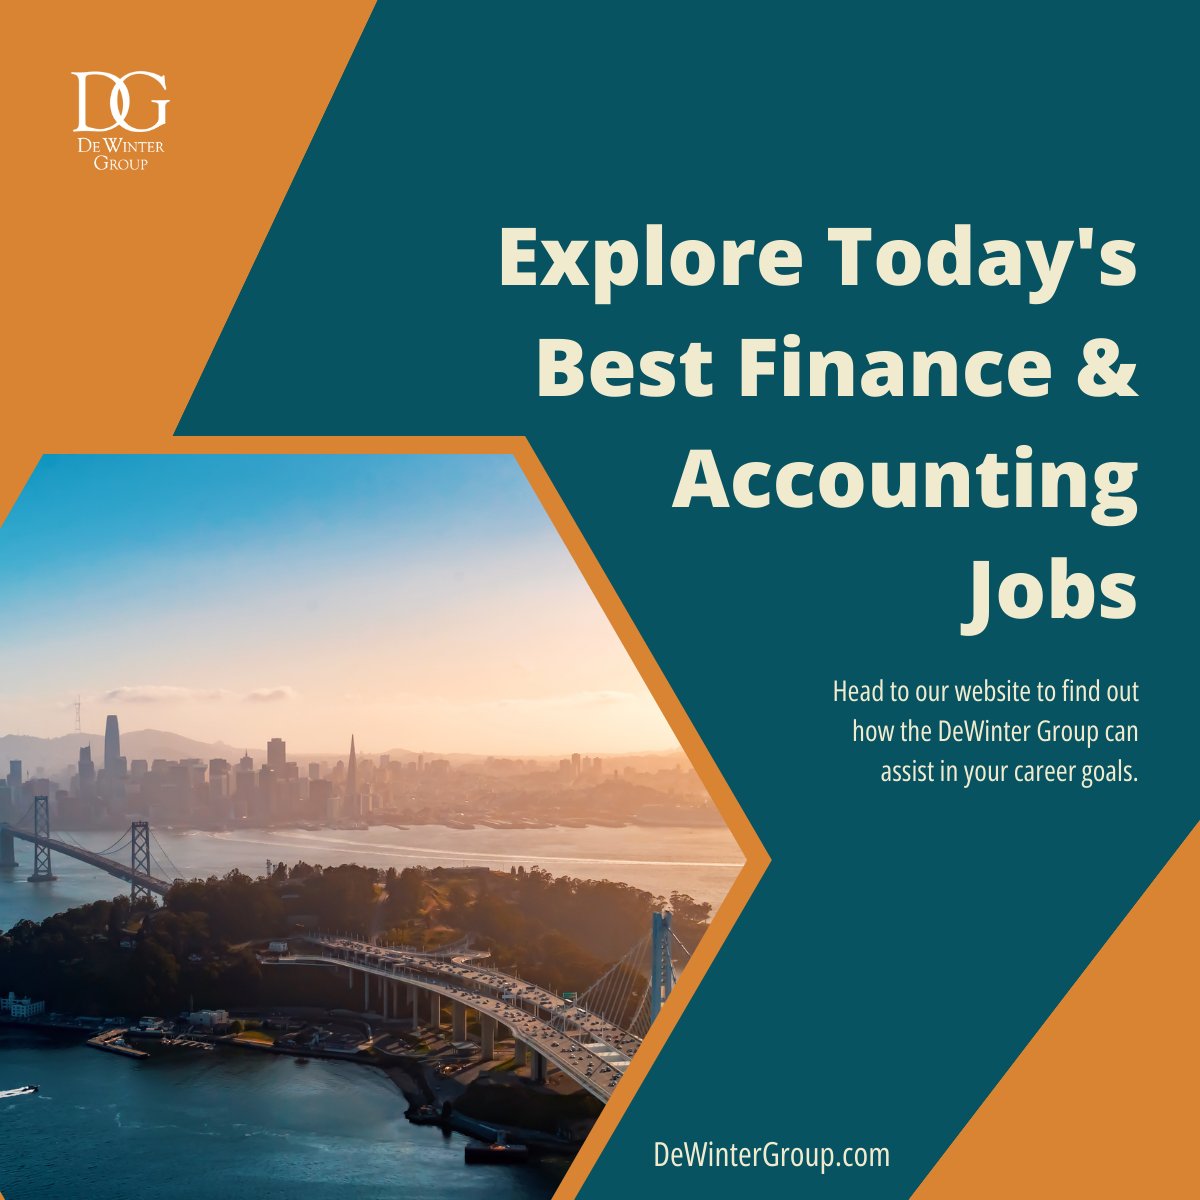 Discover top finance and accounting opportunities with the guidance of the DeWinter Group. Visit our website today to find your next career move! #financejobs #accountingjobs